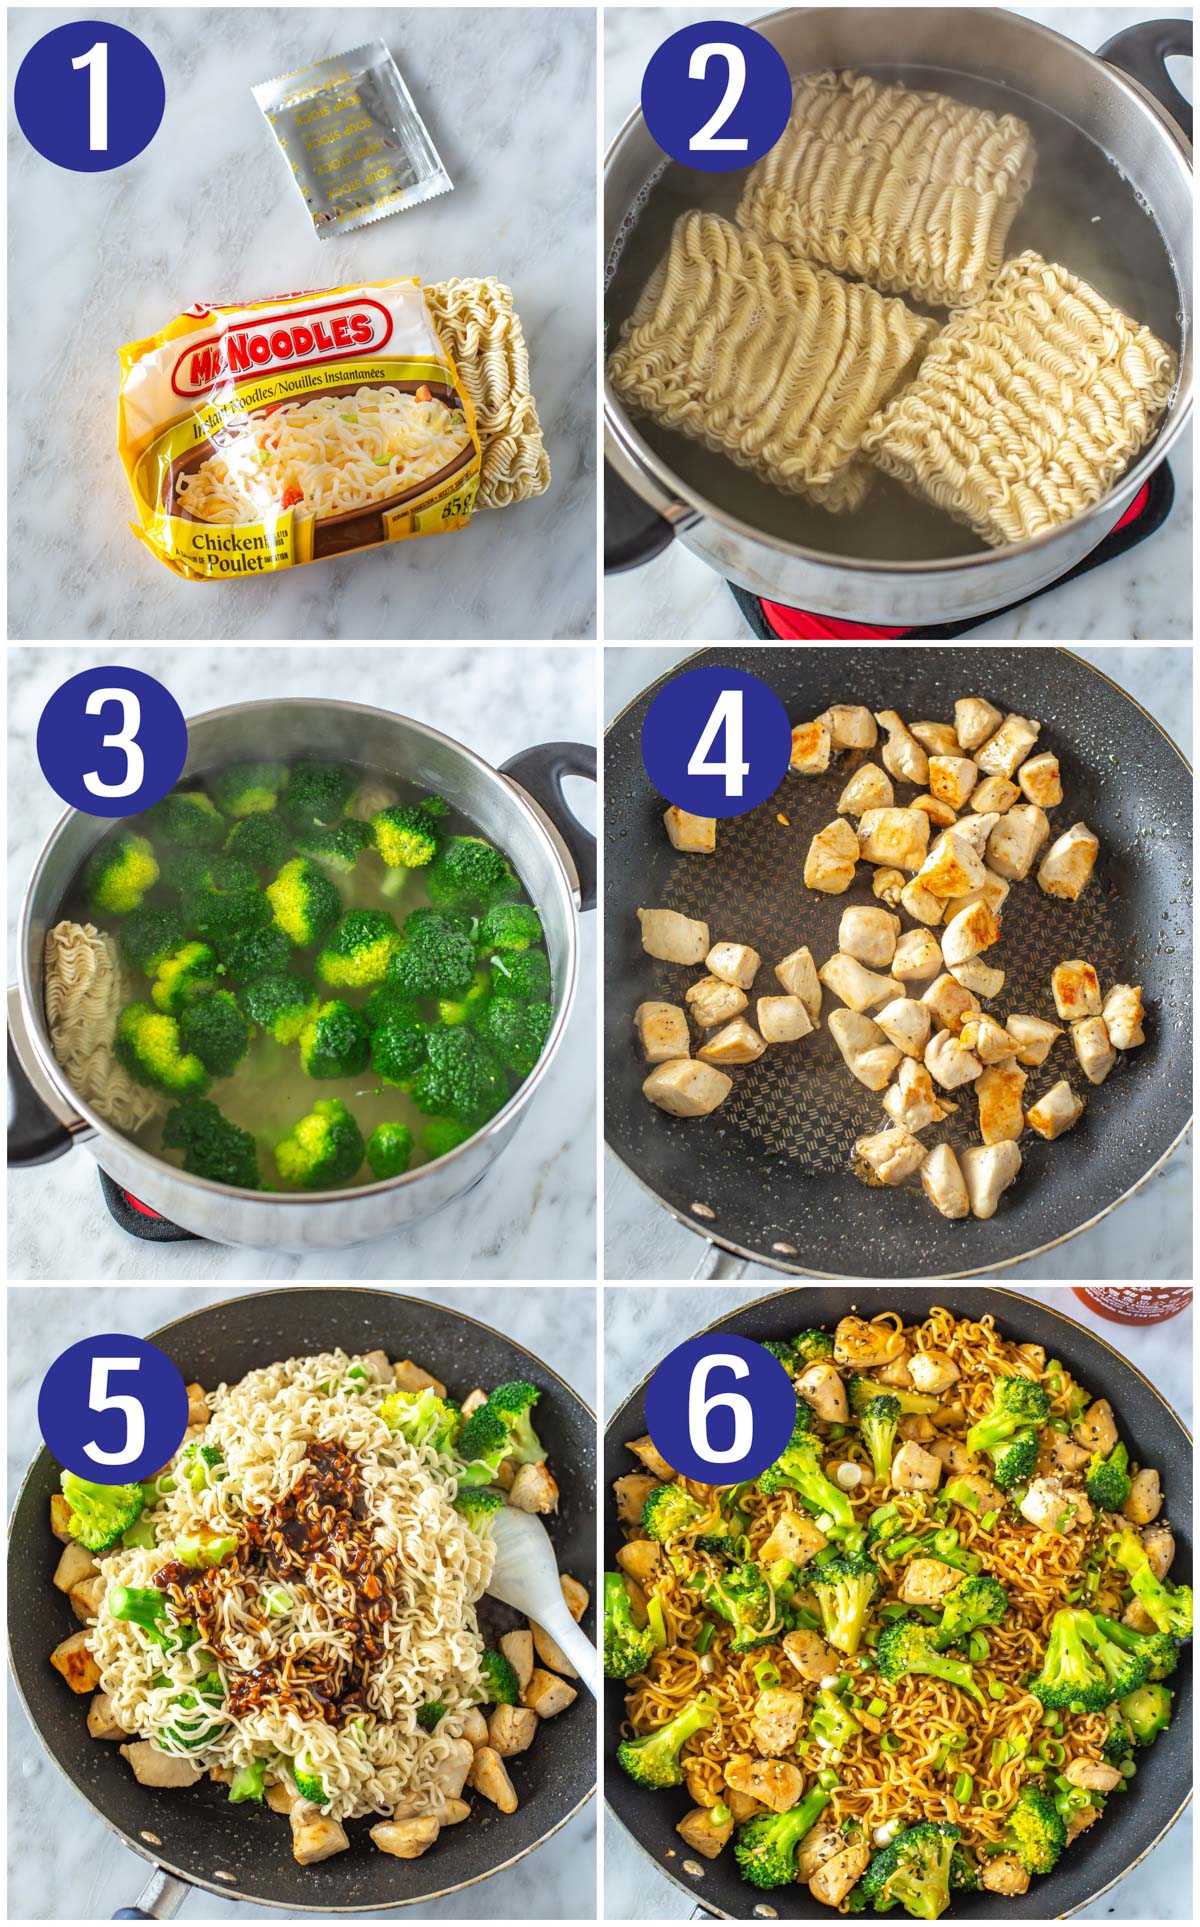 Step-by-step instructions collage for chicken ramen stir fry: cook ramen without seasoning packets, steam broccoli, cook chicken, add sauce, and mix.